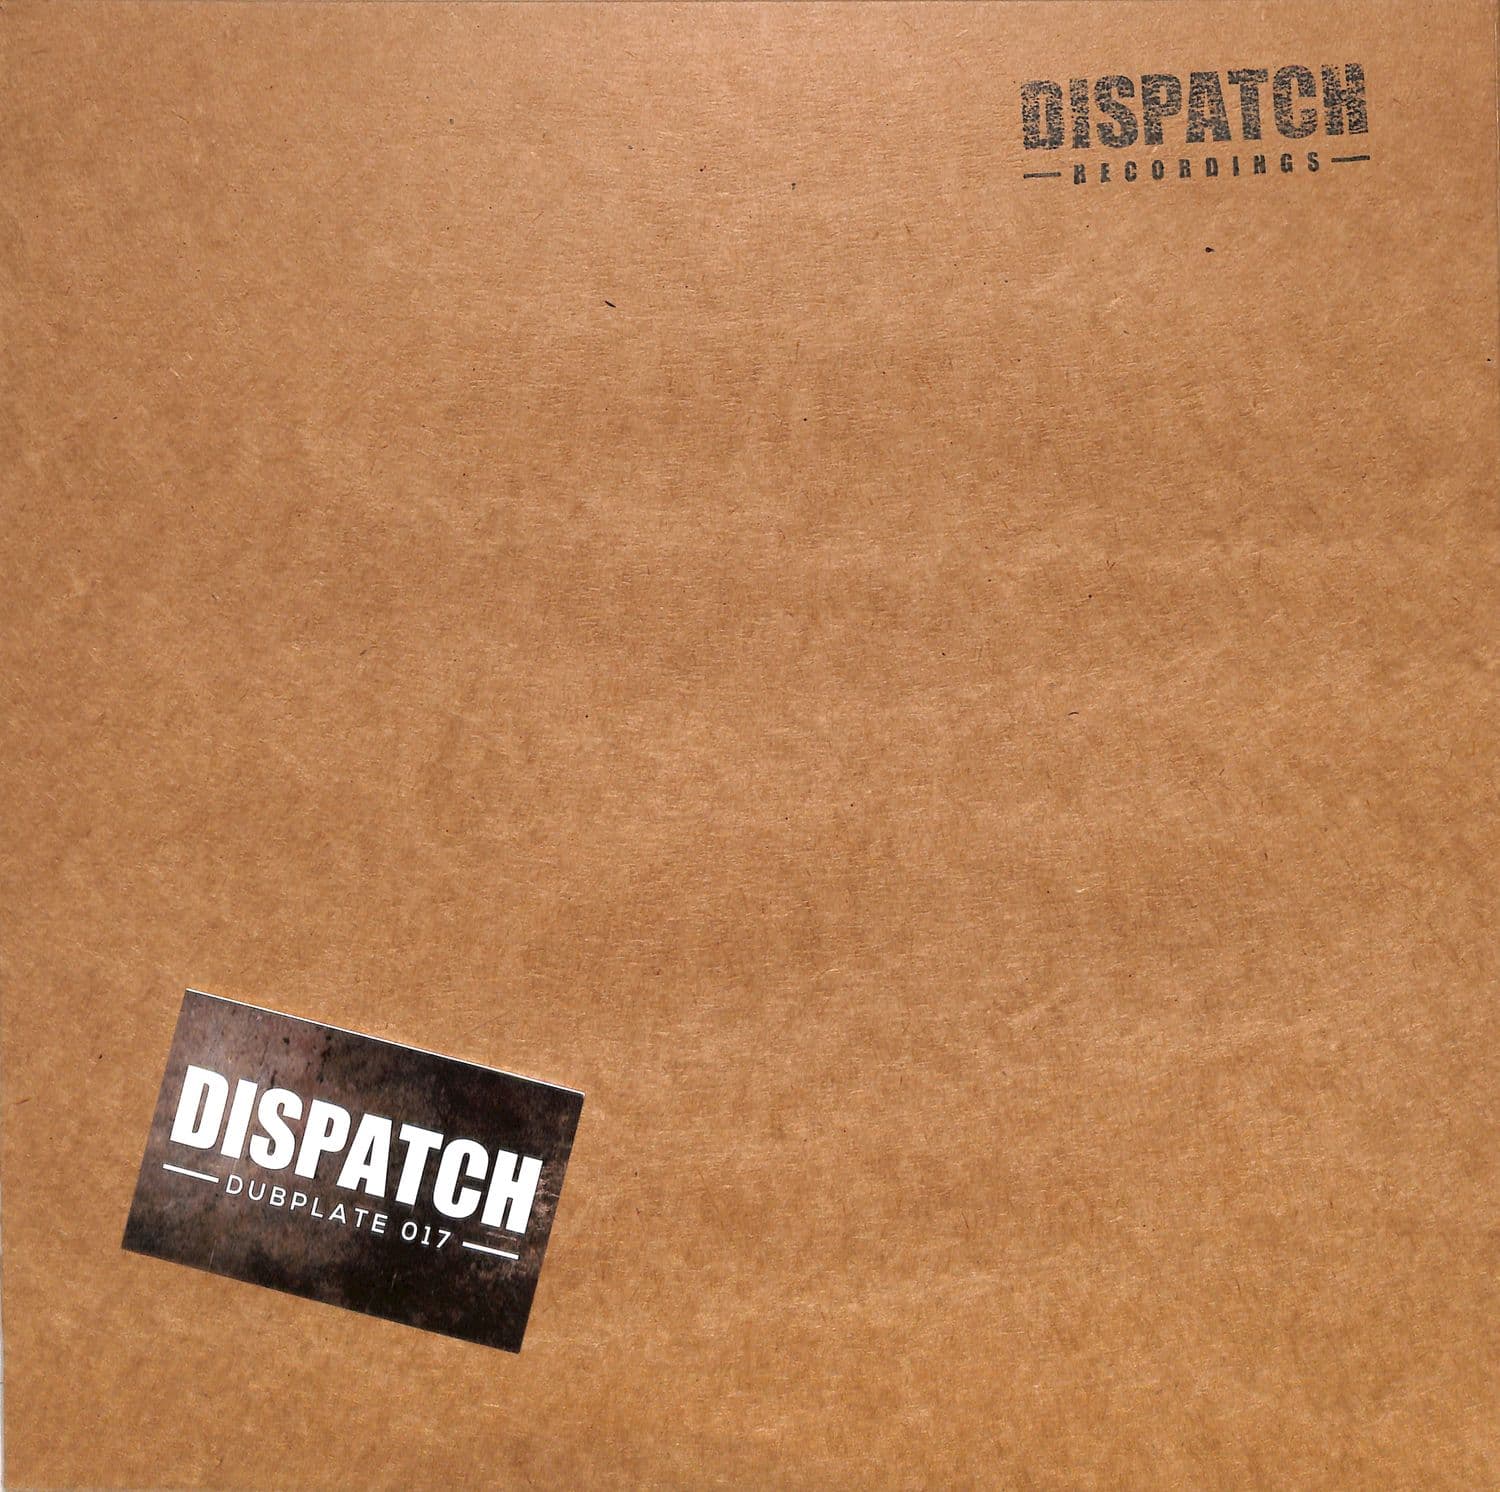 Loxy / Resound / Skeptical - DISPATCH DUBPLATE 017 